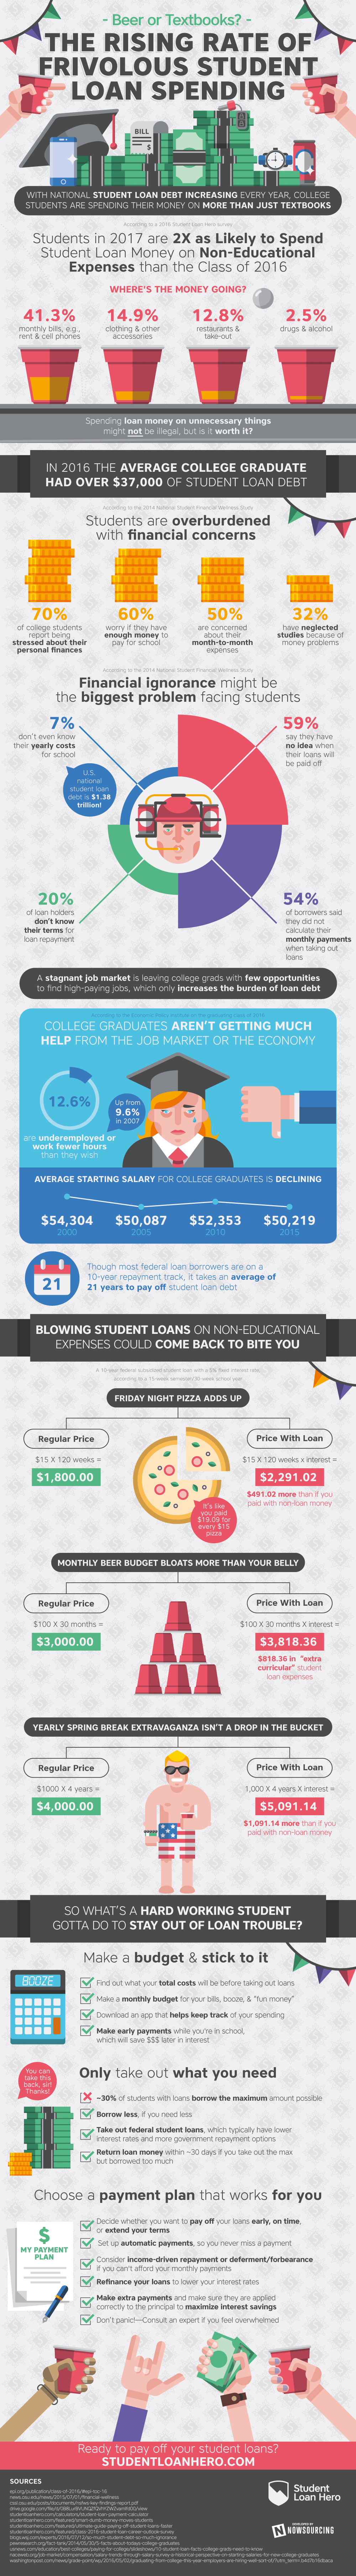 How Students Are Spending Their Loans Infographic